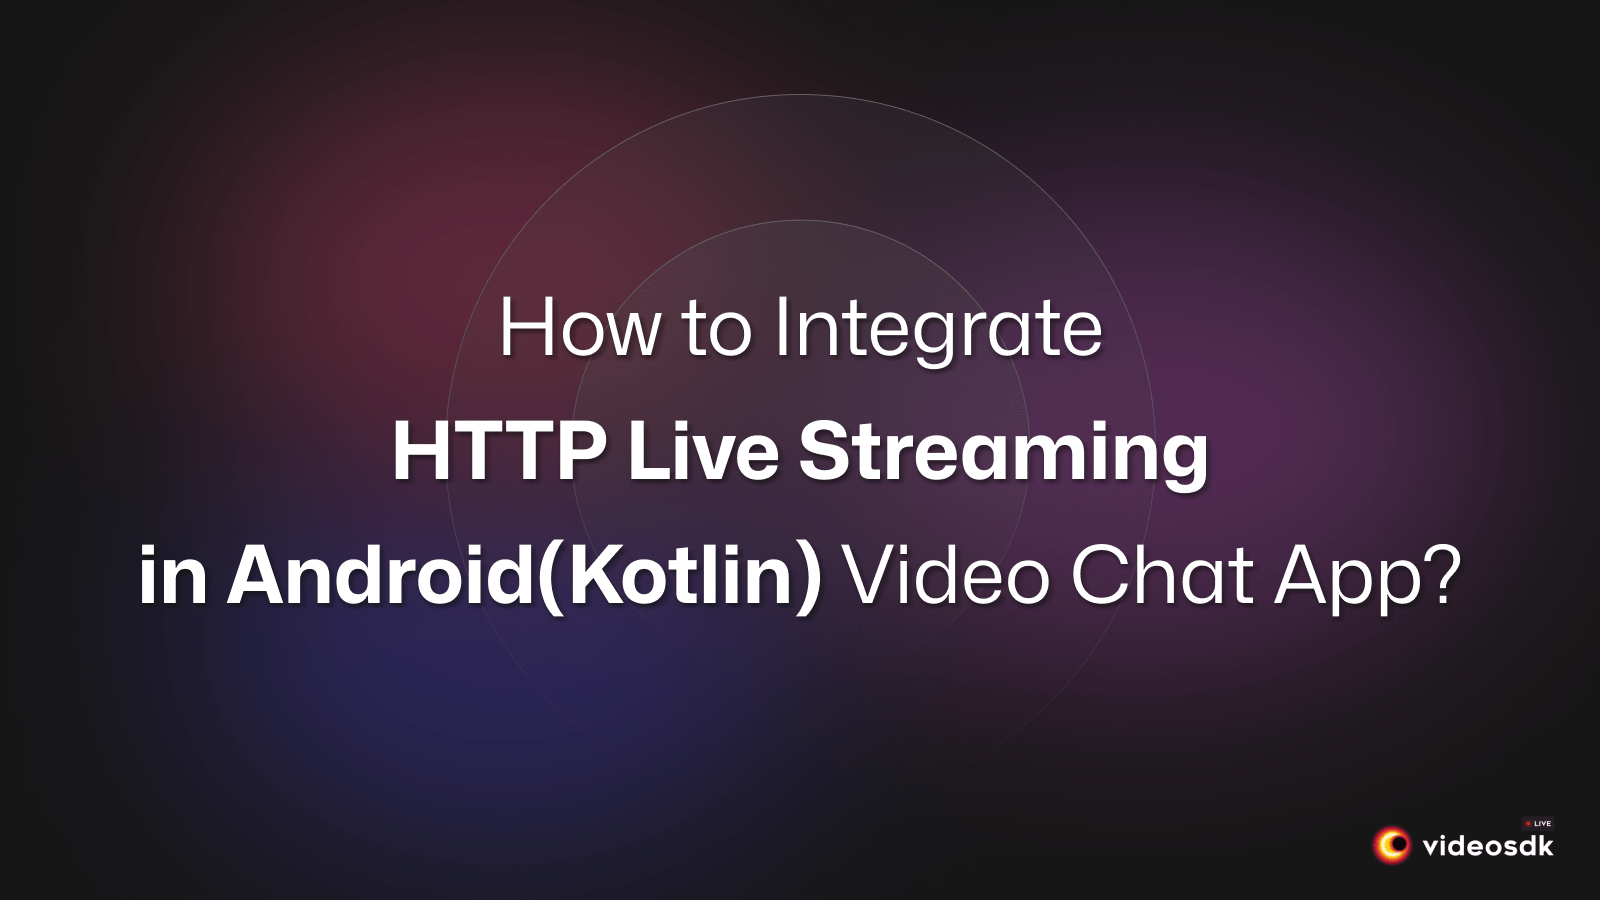 Build an Android Live Streaming Video Chat App Using Kotlin?